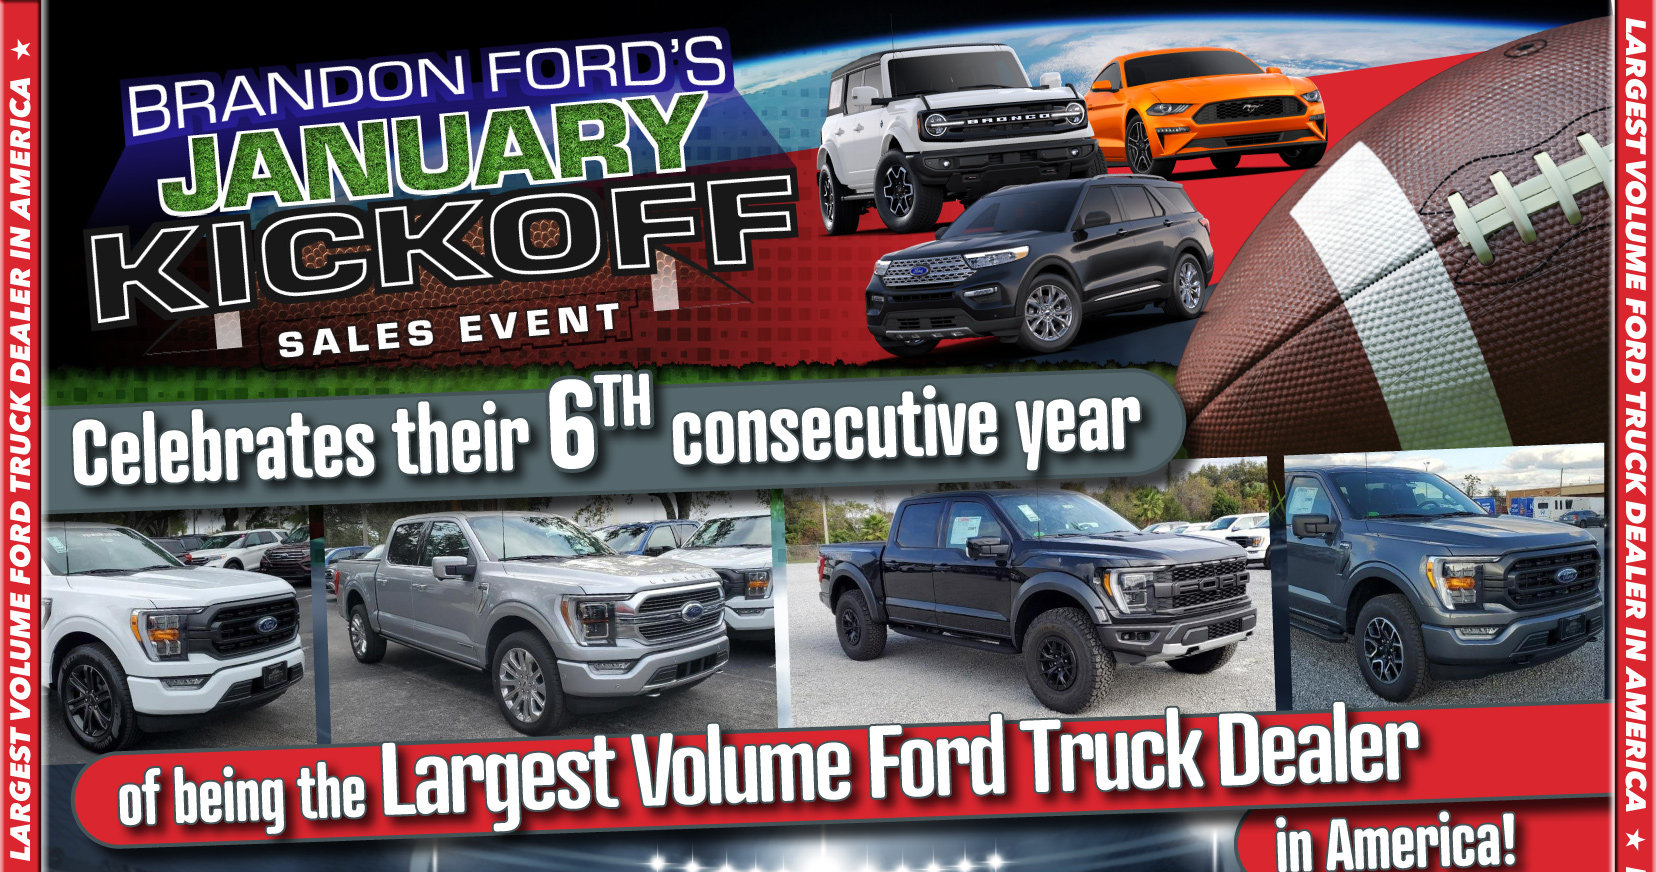 January Kickoff Sales Event